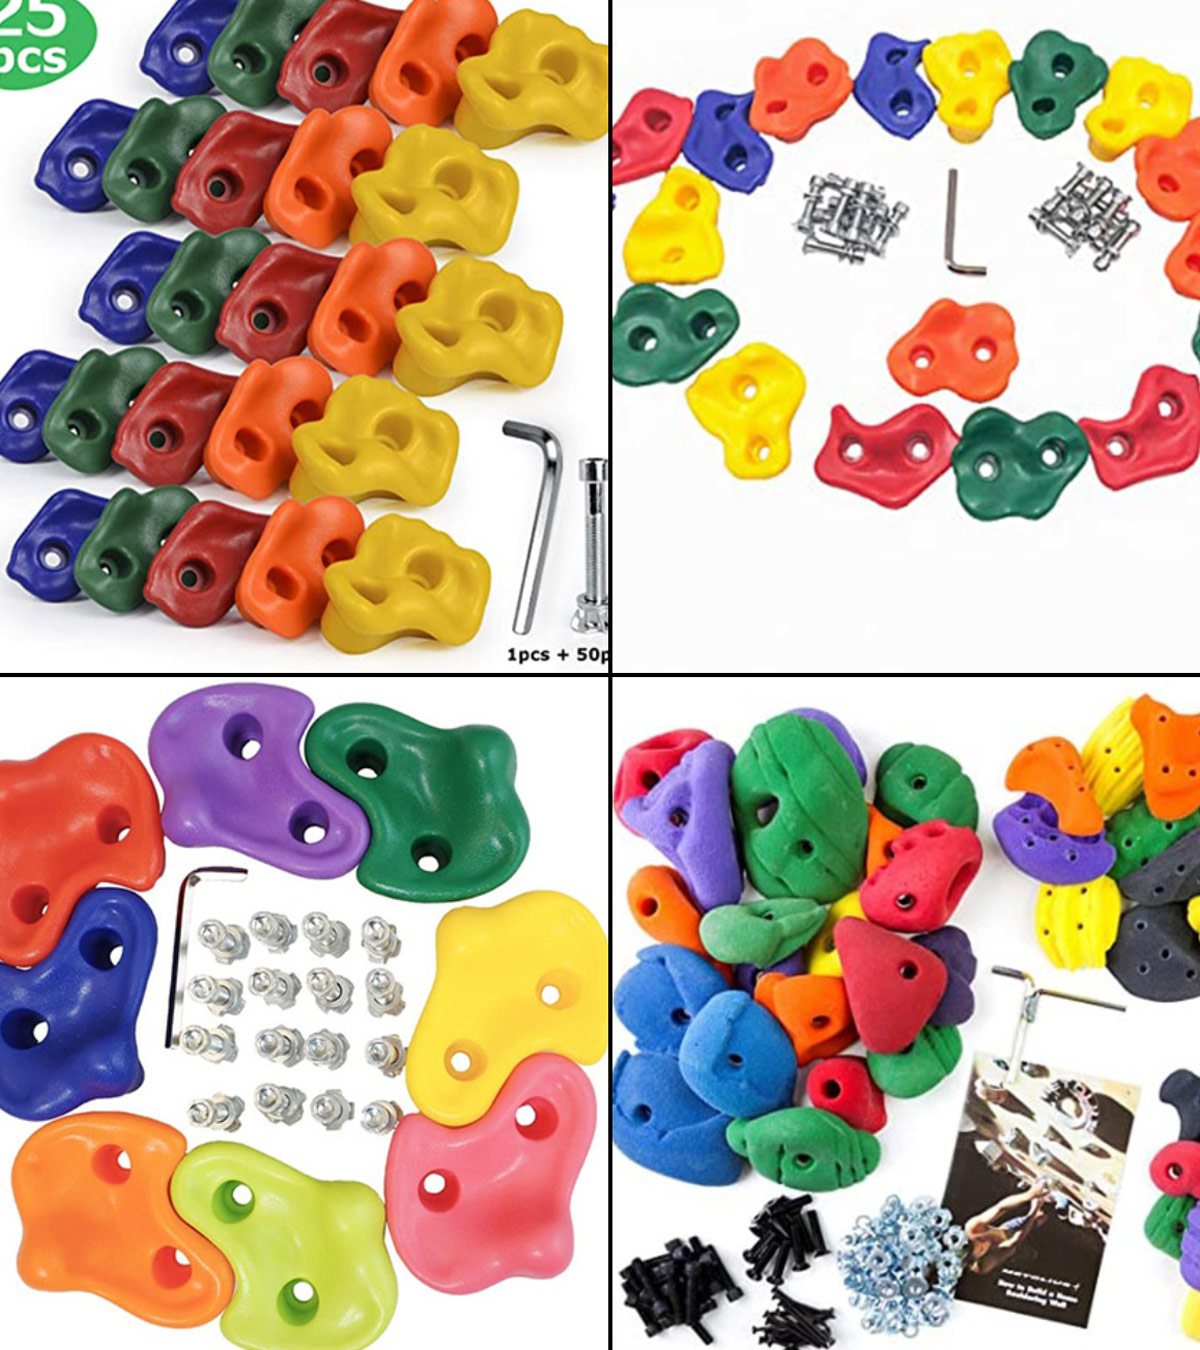 Stones Rebo Plastic Bolt on Climbing Holds Grips for Kids Rock Climbing Walls x 10 